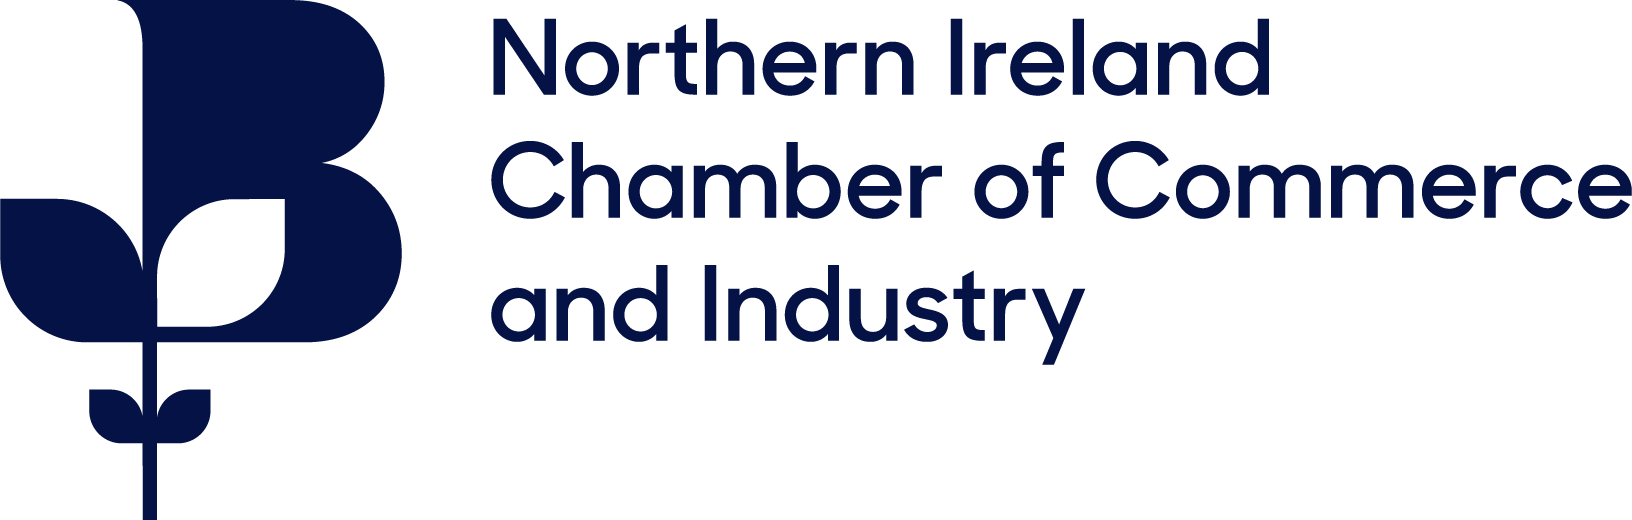 Northern Ireland Chamber of Commerce & Industry